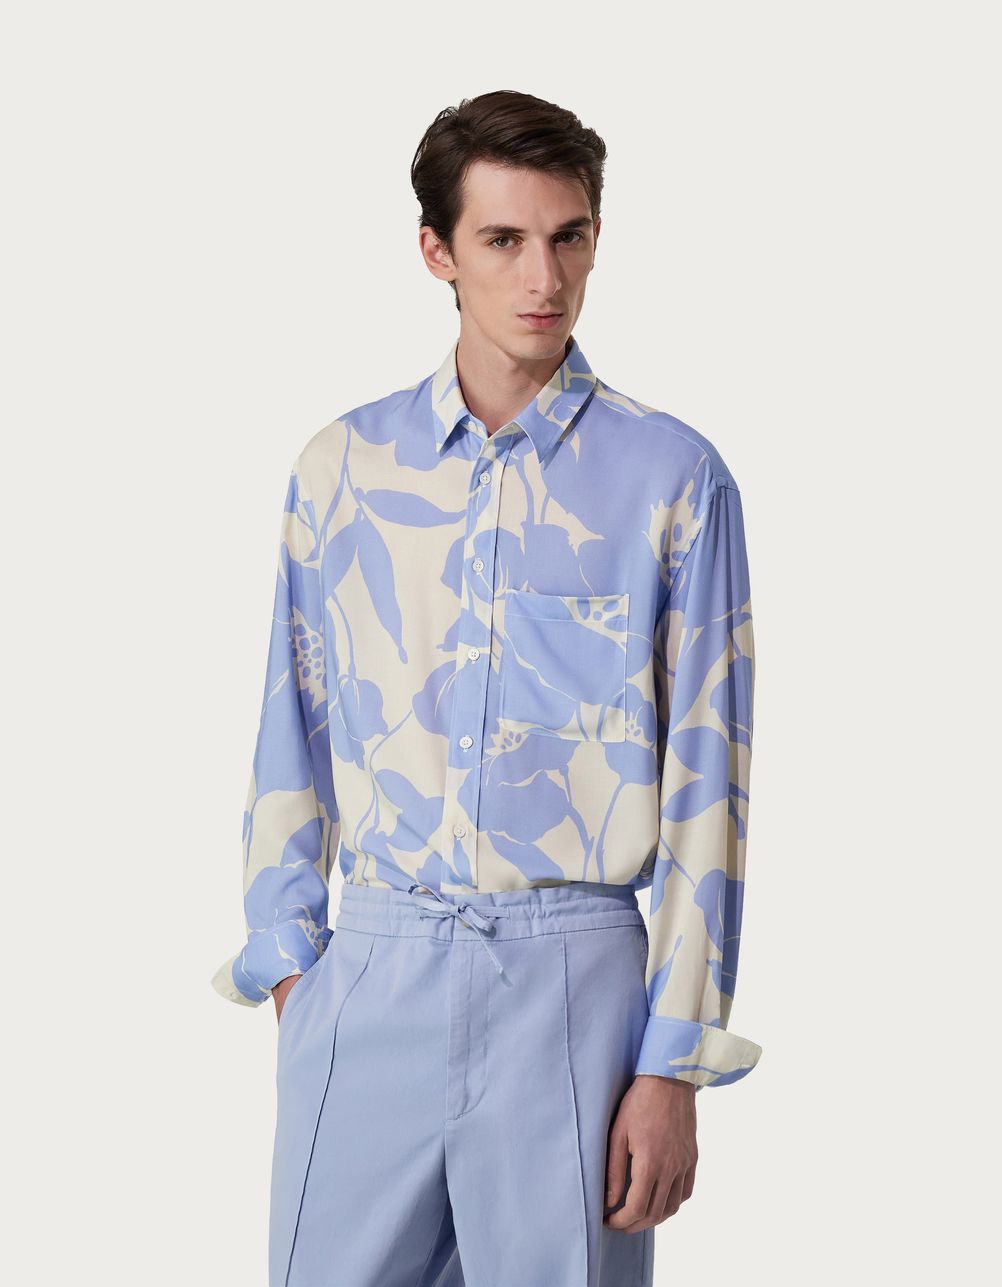 Relaxed-fit shirt in light blue and beige